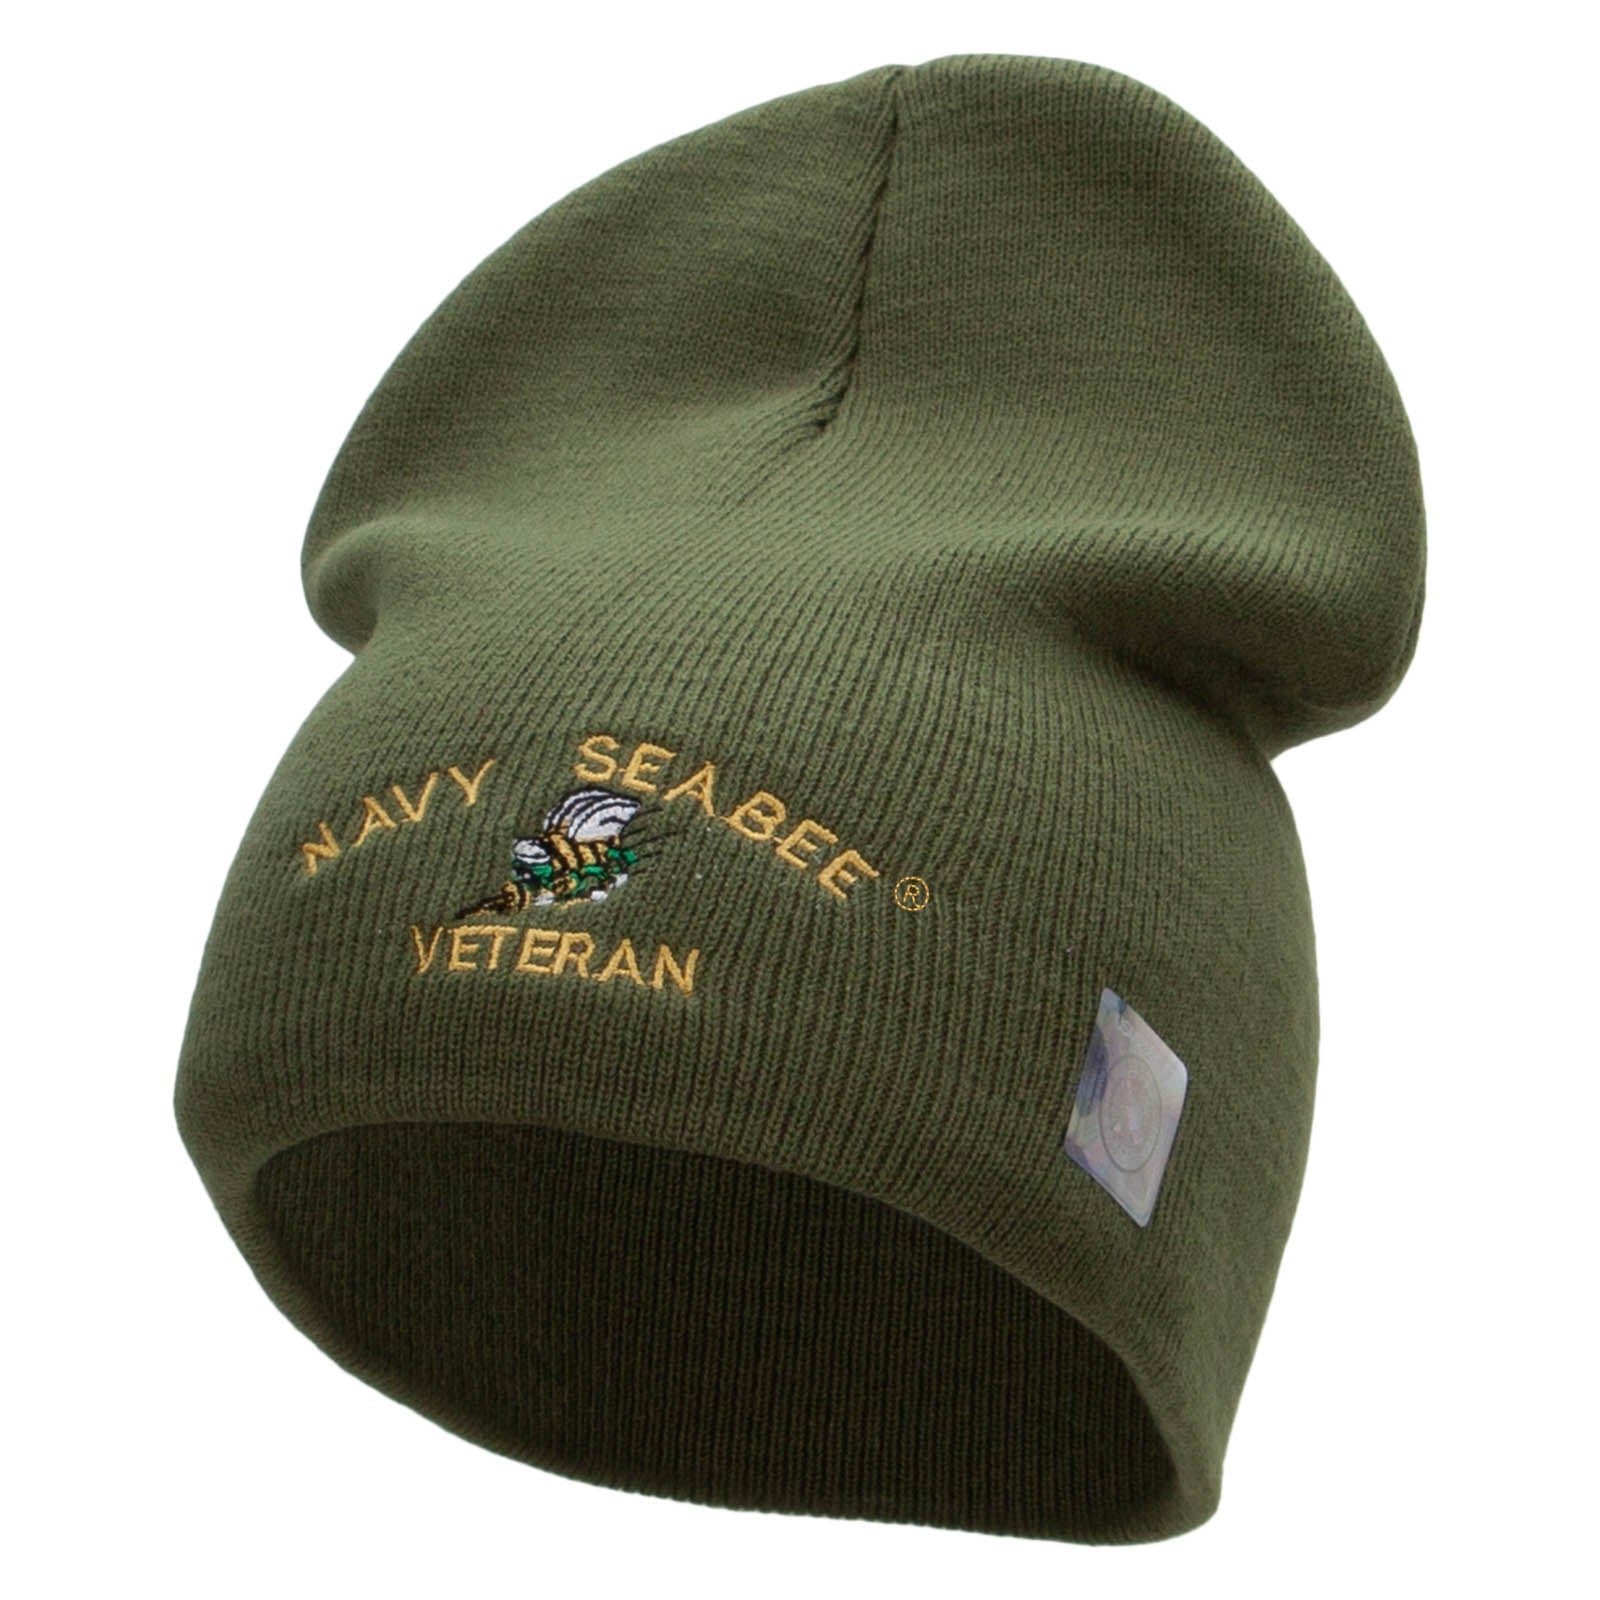 Licensed Navy Seabee Veteran Embroidered Short Beanie Made in USA - Olive OSFM